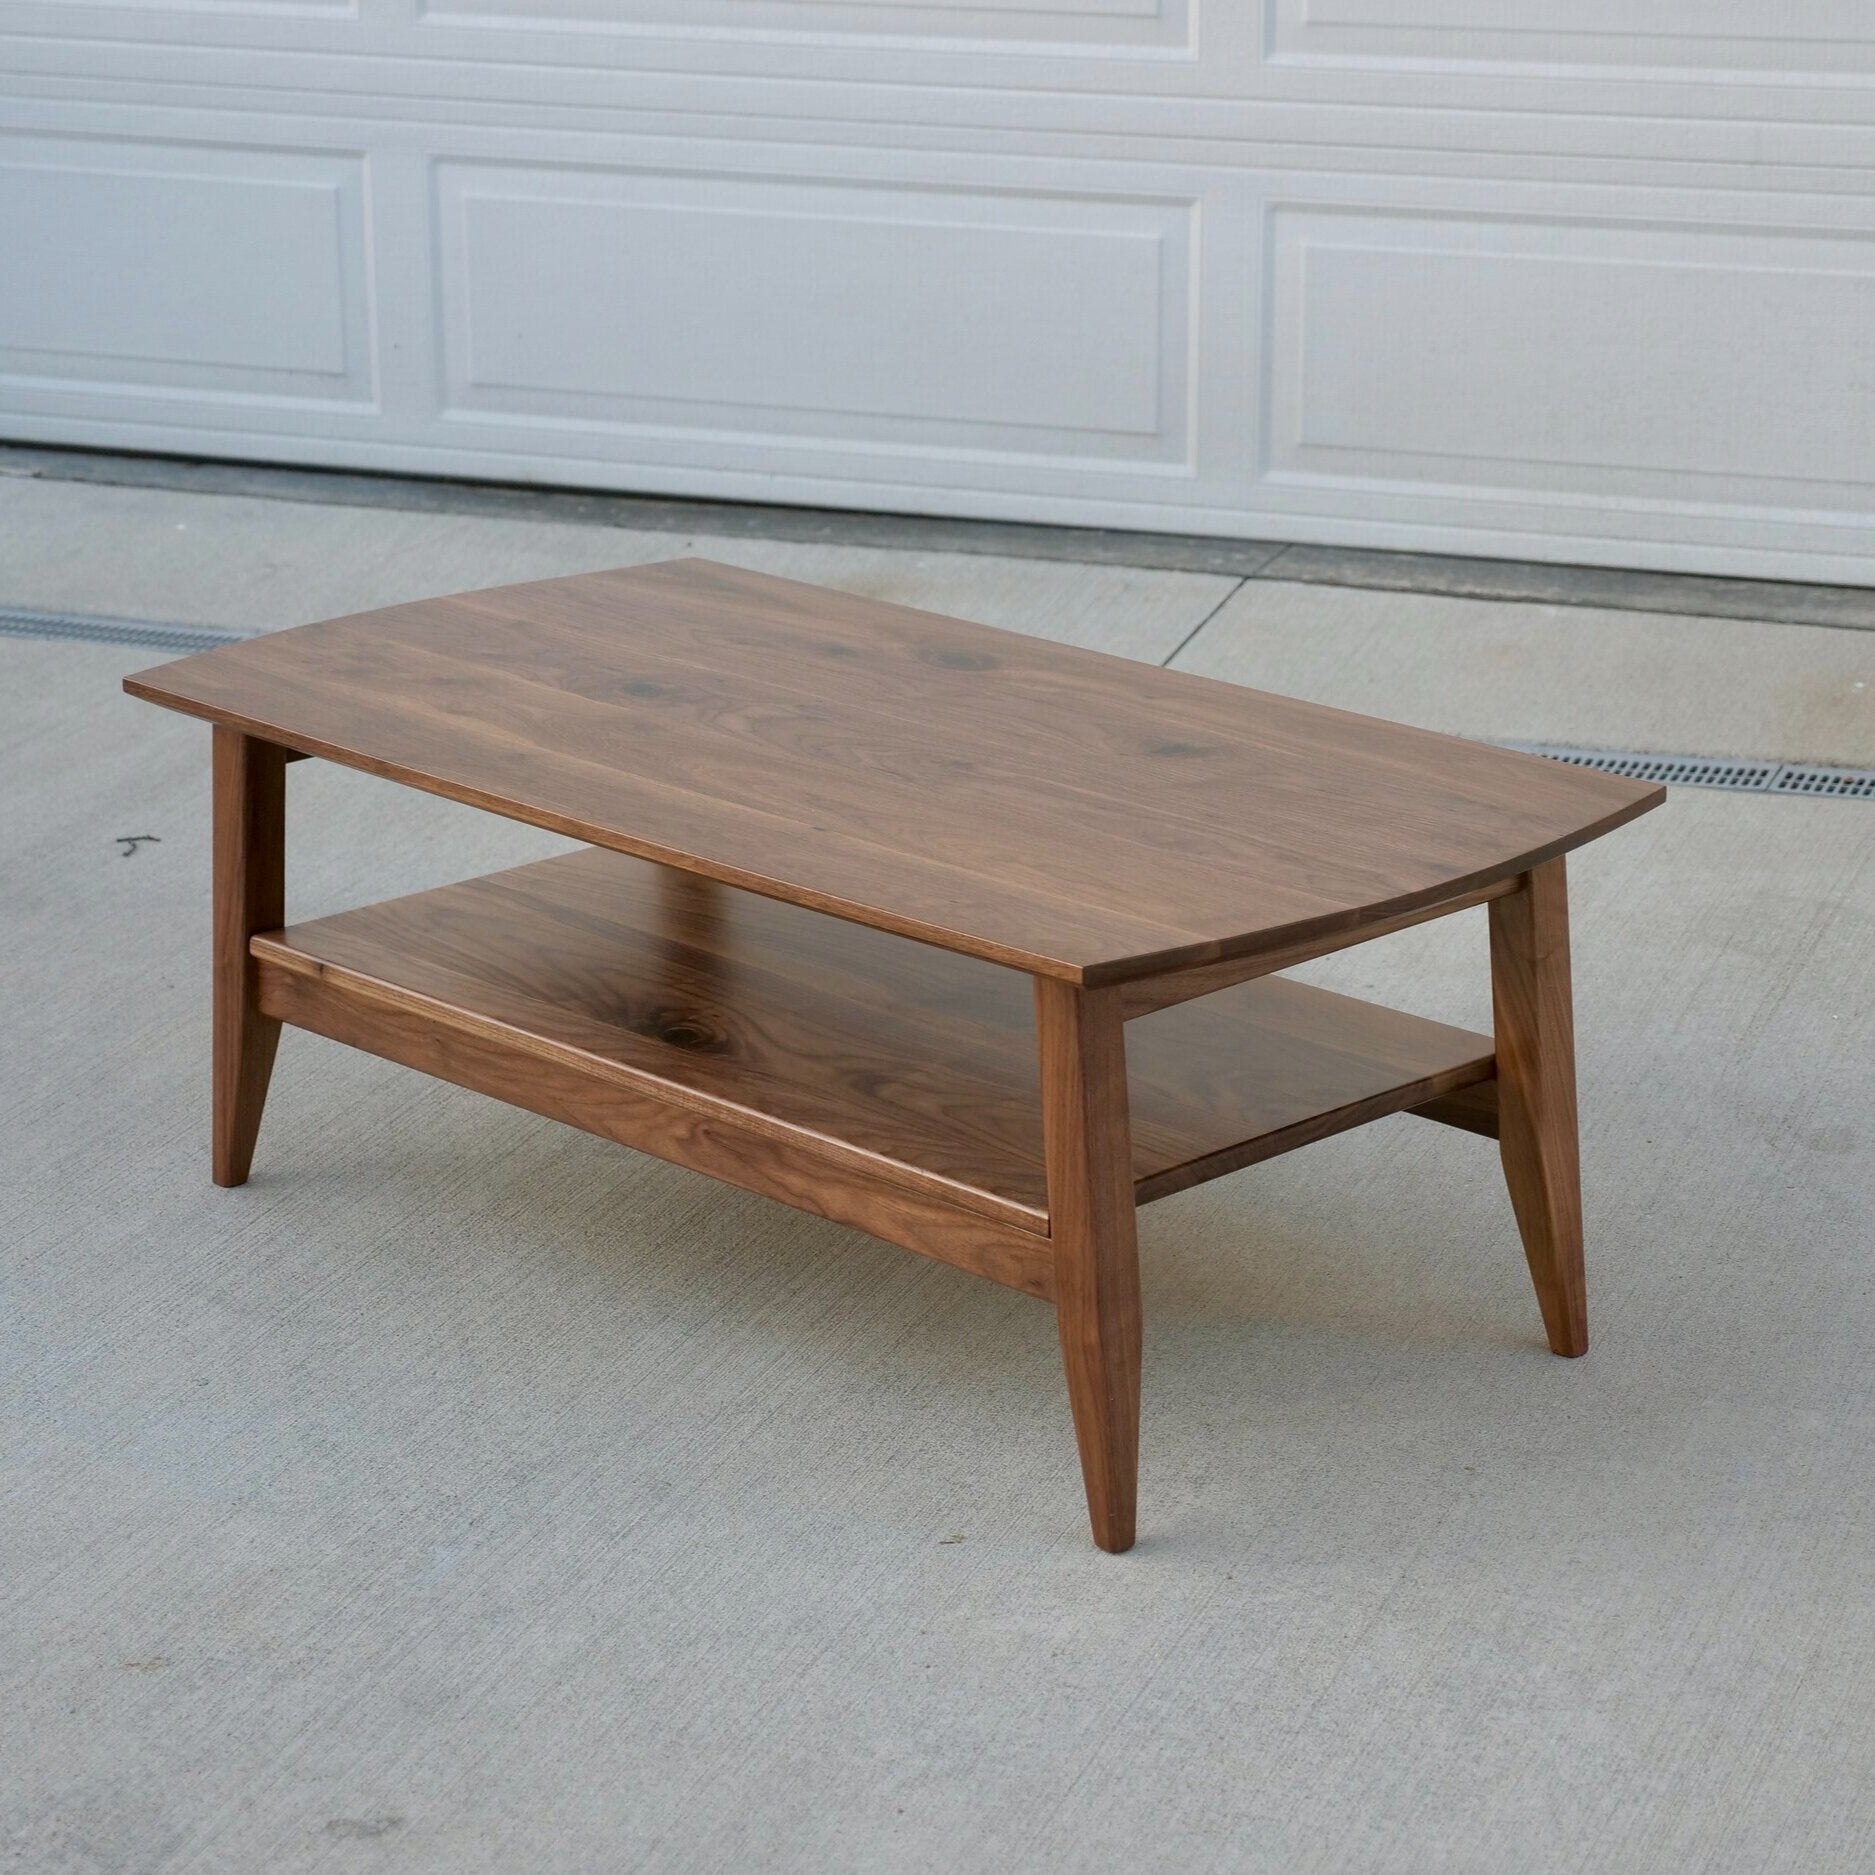 Spencley Design Co - CODY COFFEE TABLE - PLANS